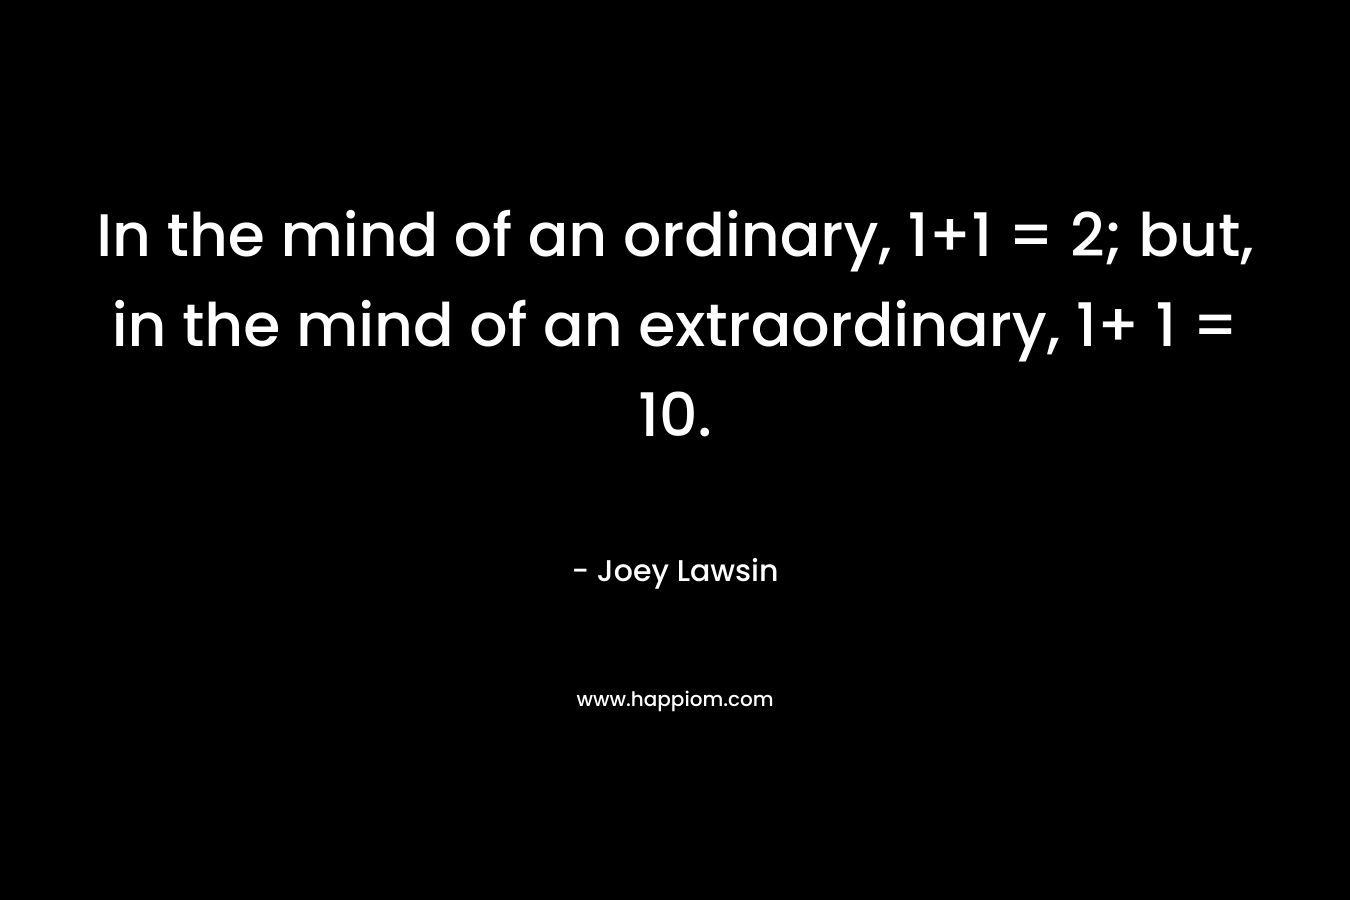 In the mind of an ordinary, 1+1 = 2; but, in the mind of an extraordinary, 1+ 1 = 10.